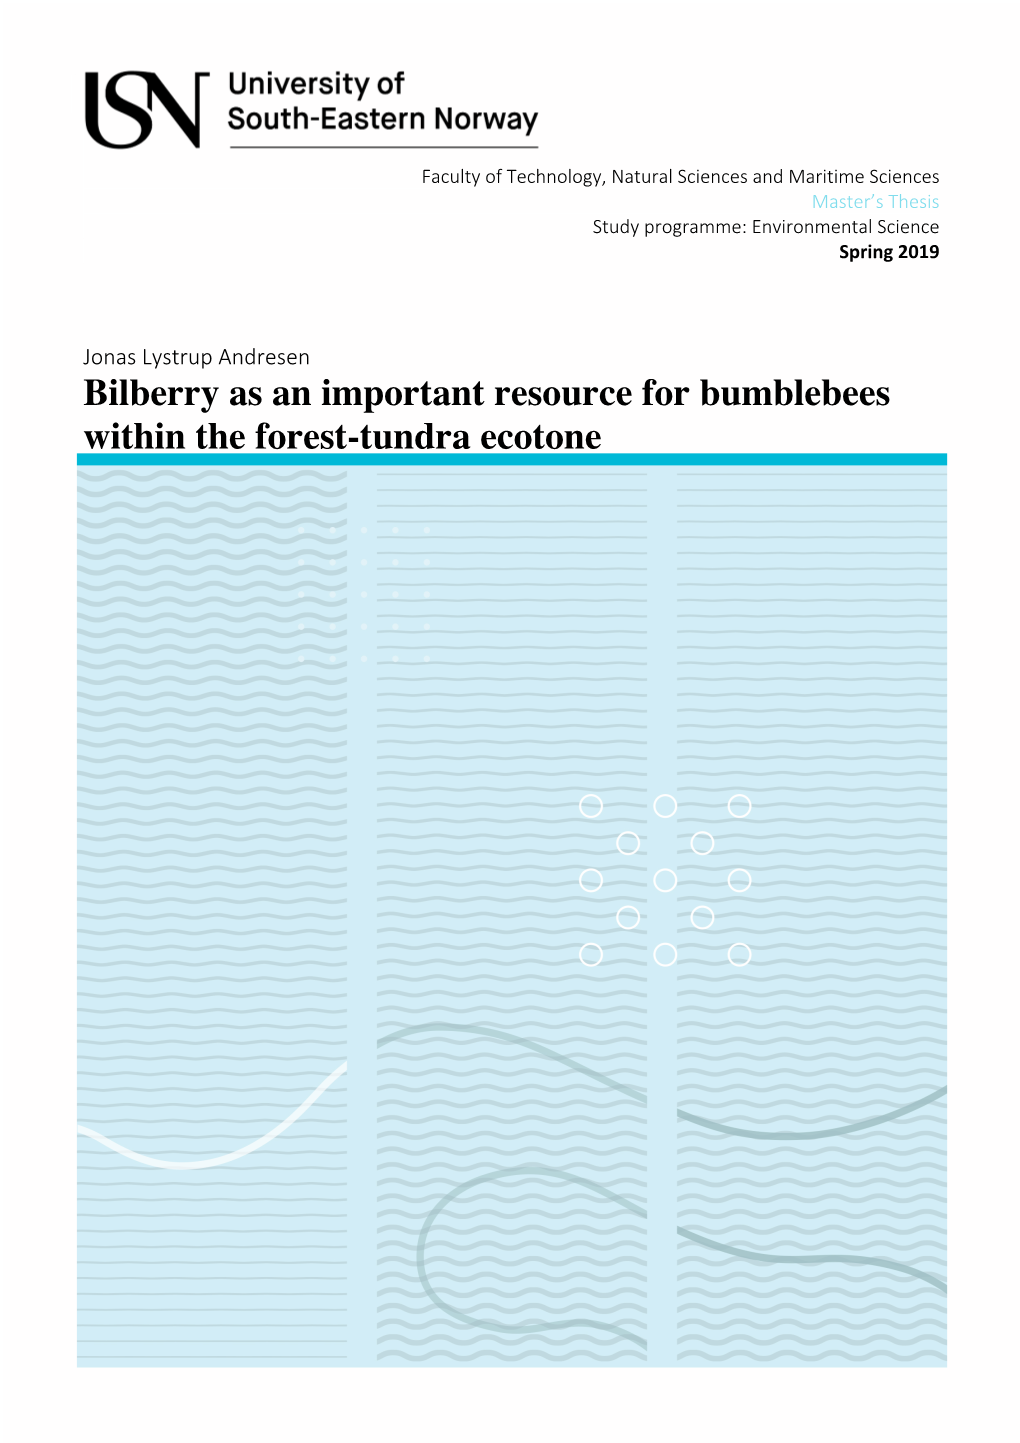 Bilberry As an Important Resource for Bumblebees Within the Forest-Tundra Ecotone